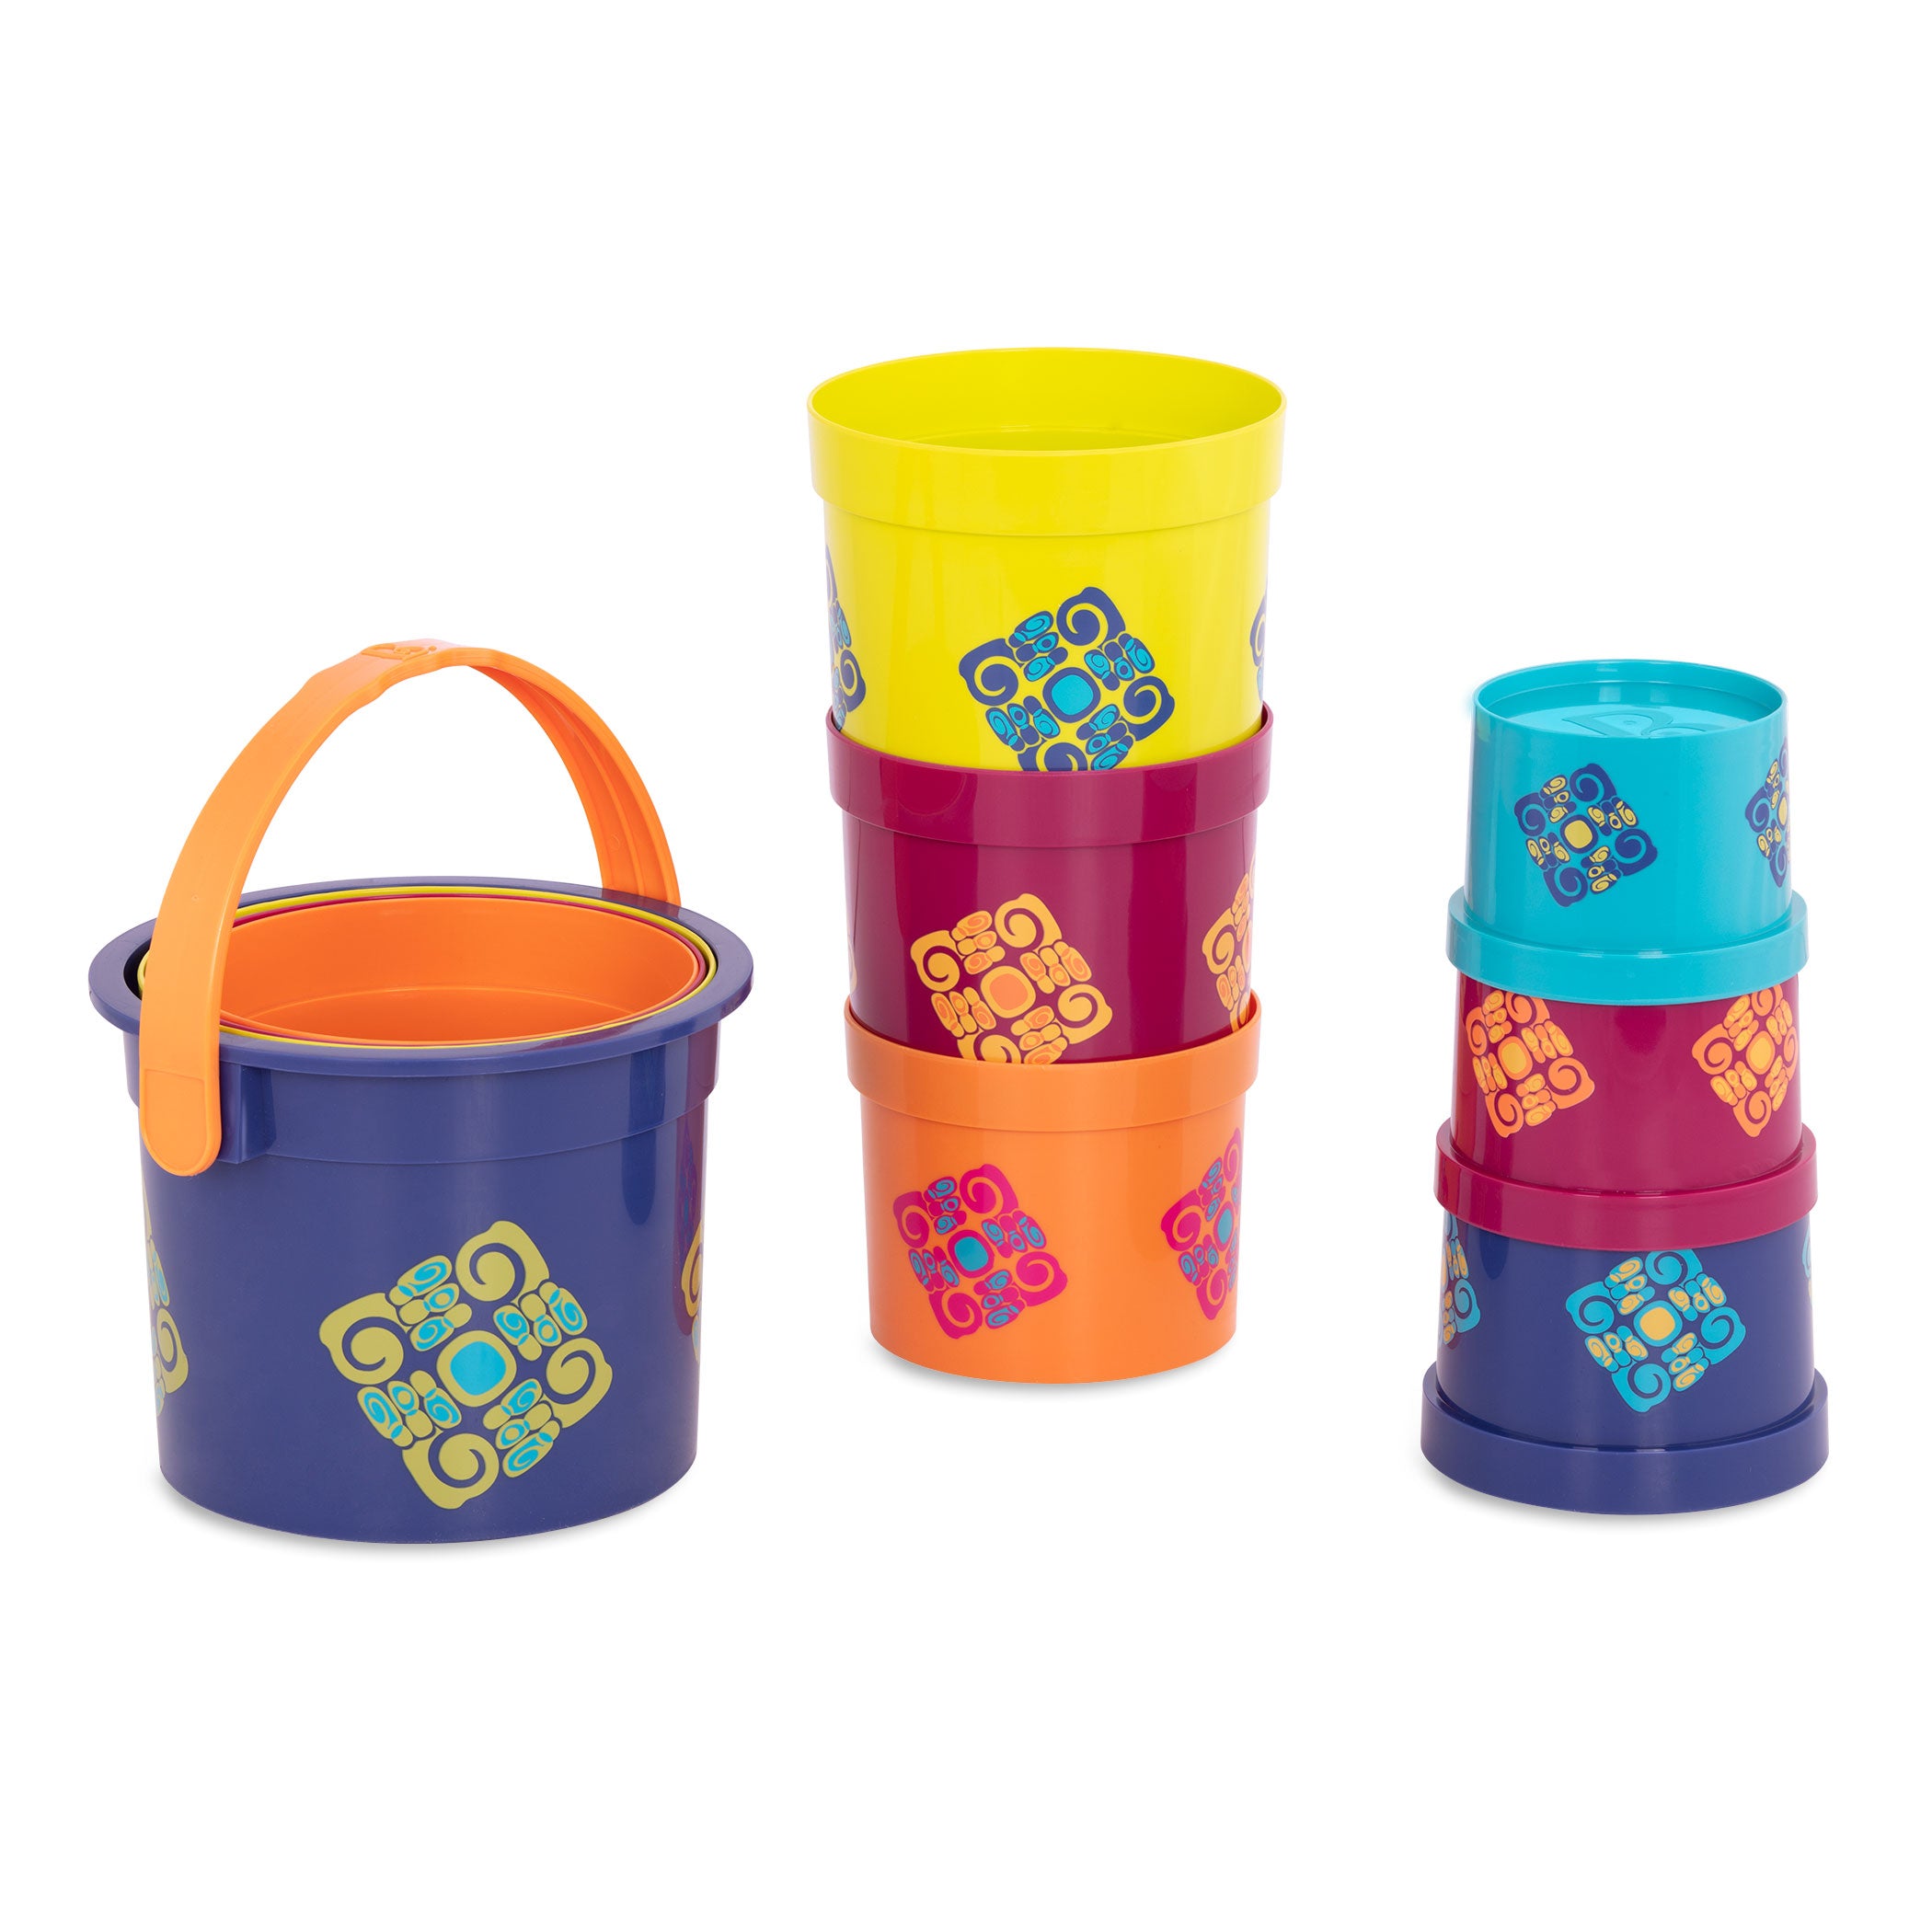 Colorful nesting buckets.